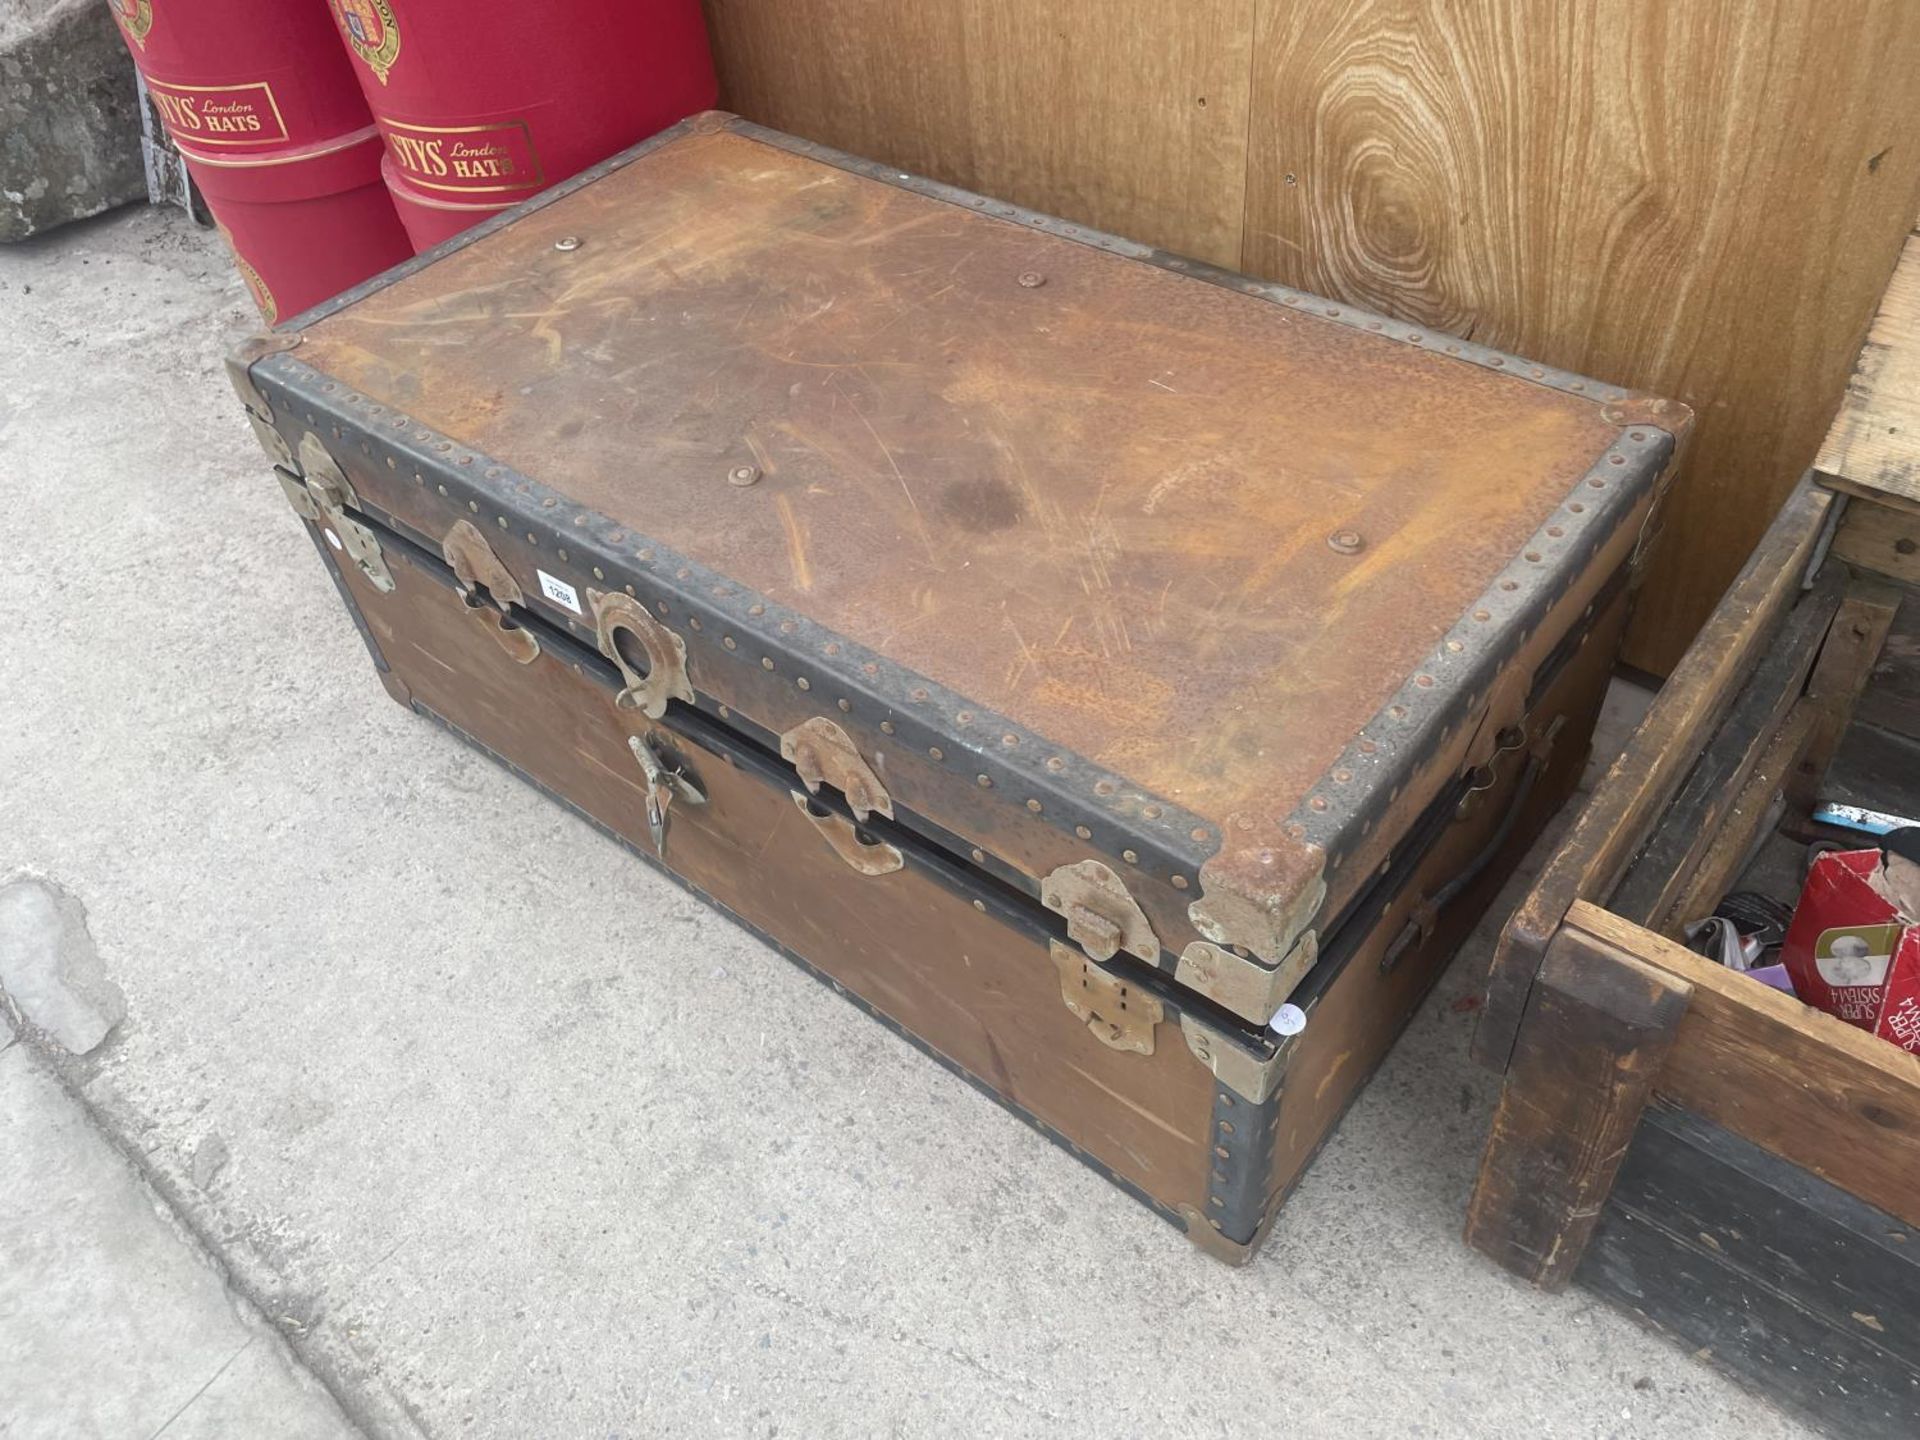 A VINTAGE TRAVEL TRUNK CONTAINING VARIOUS VINTAGE BOOKS - Image 4 of 5